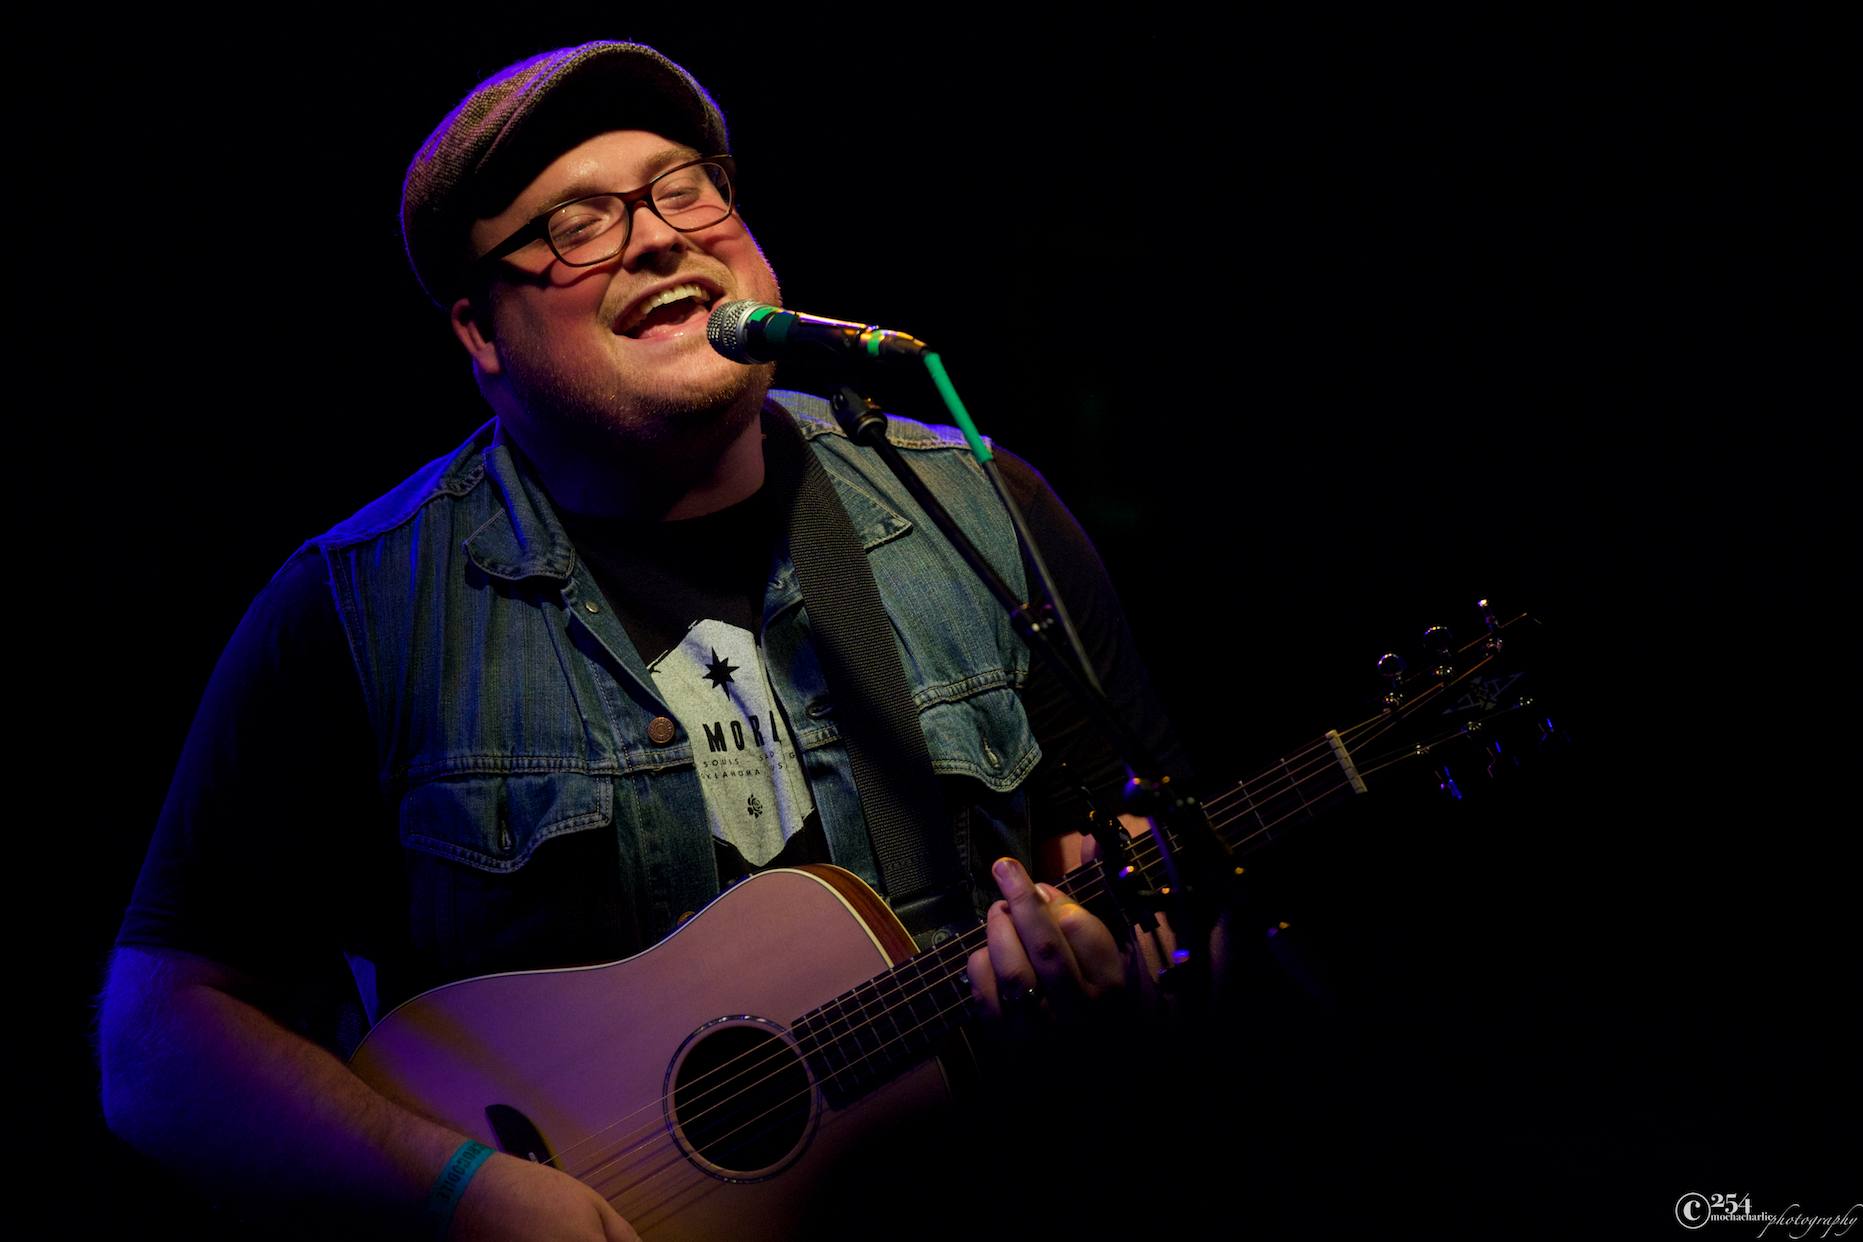 Austin Jenckes at Chinook Fest West Reveal at The Crocodile (Photo by Mocha Charlie)